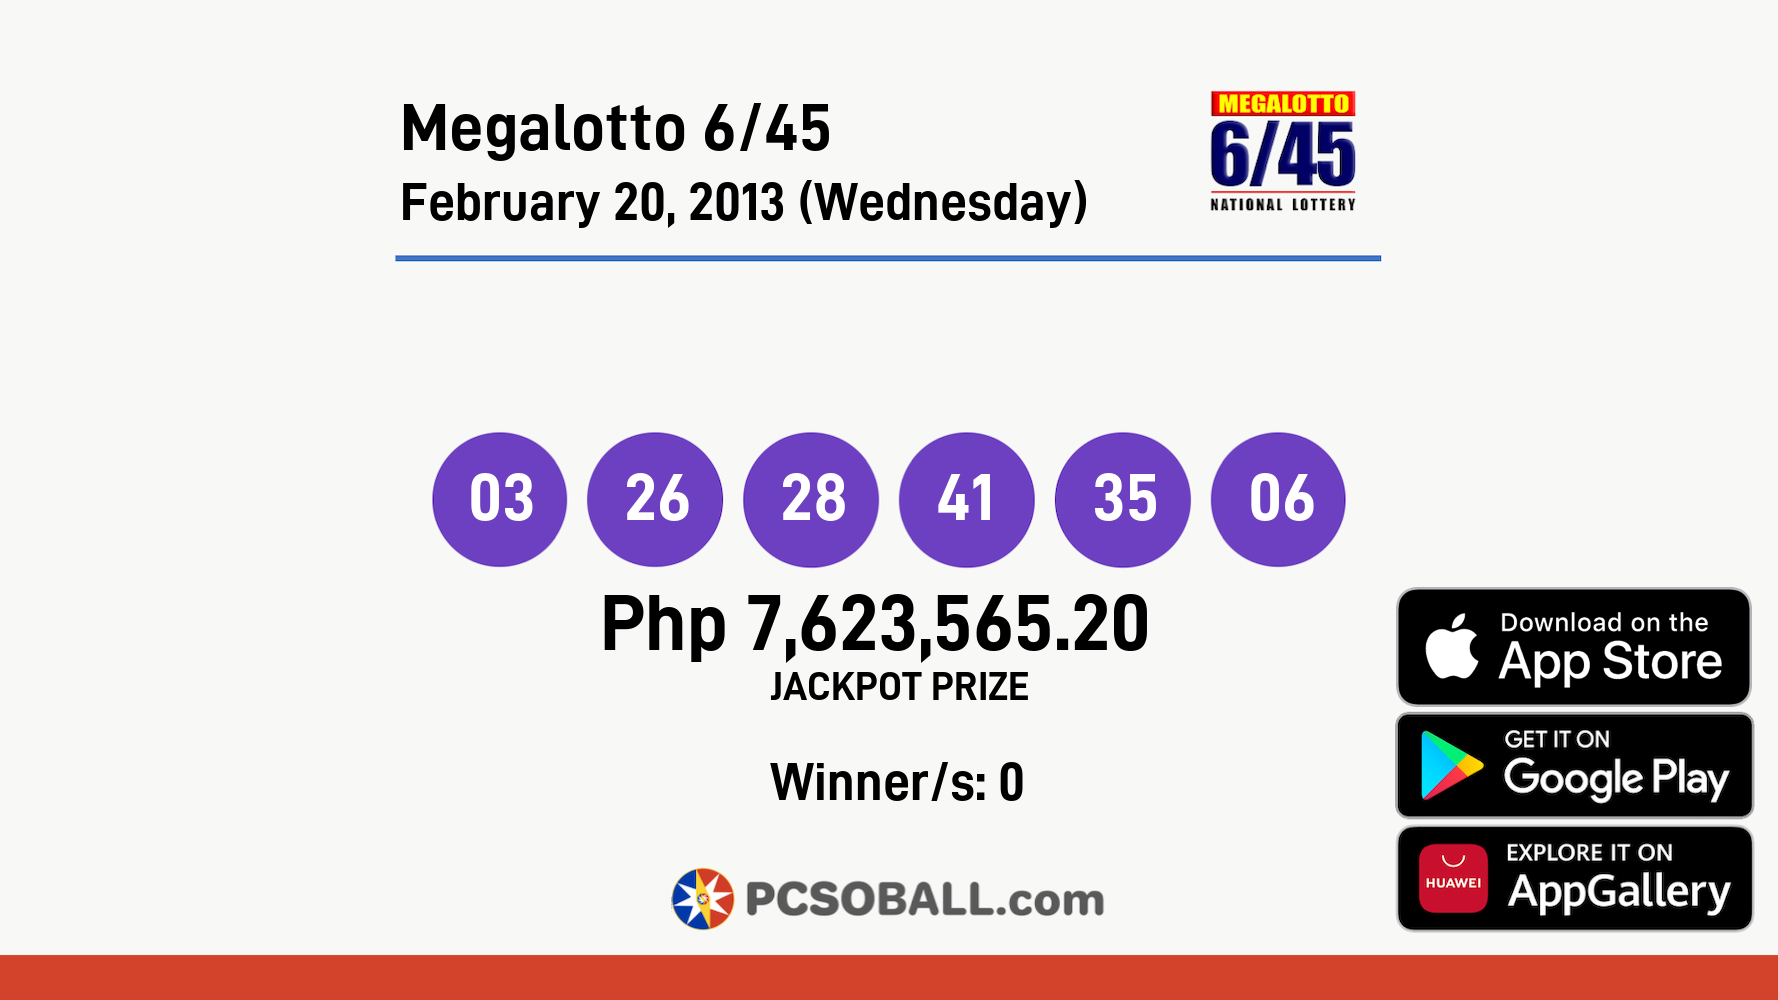 Megalotto 6/45 February 20, 2013 (Wednesday) Result